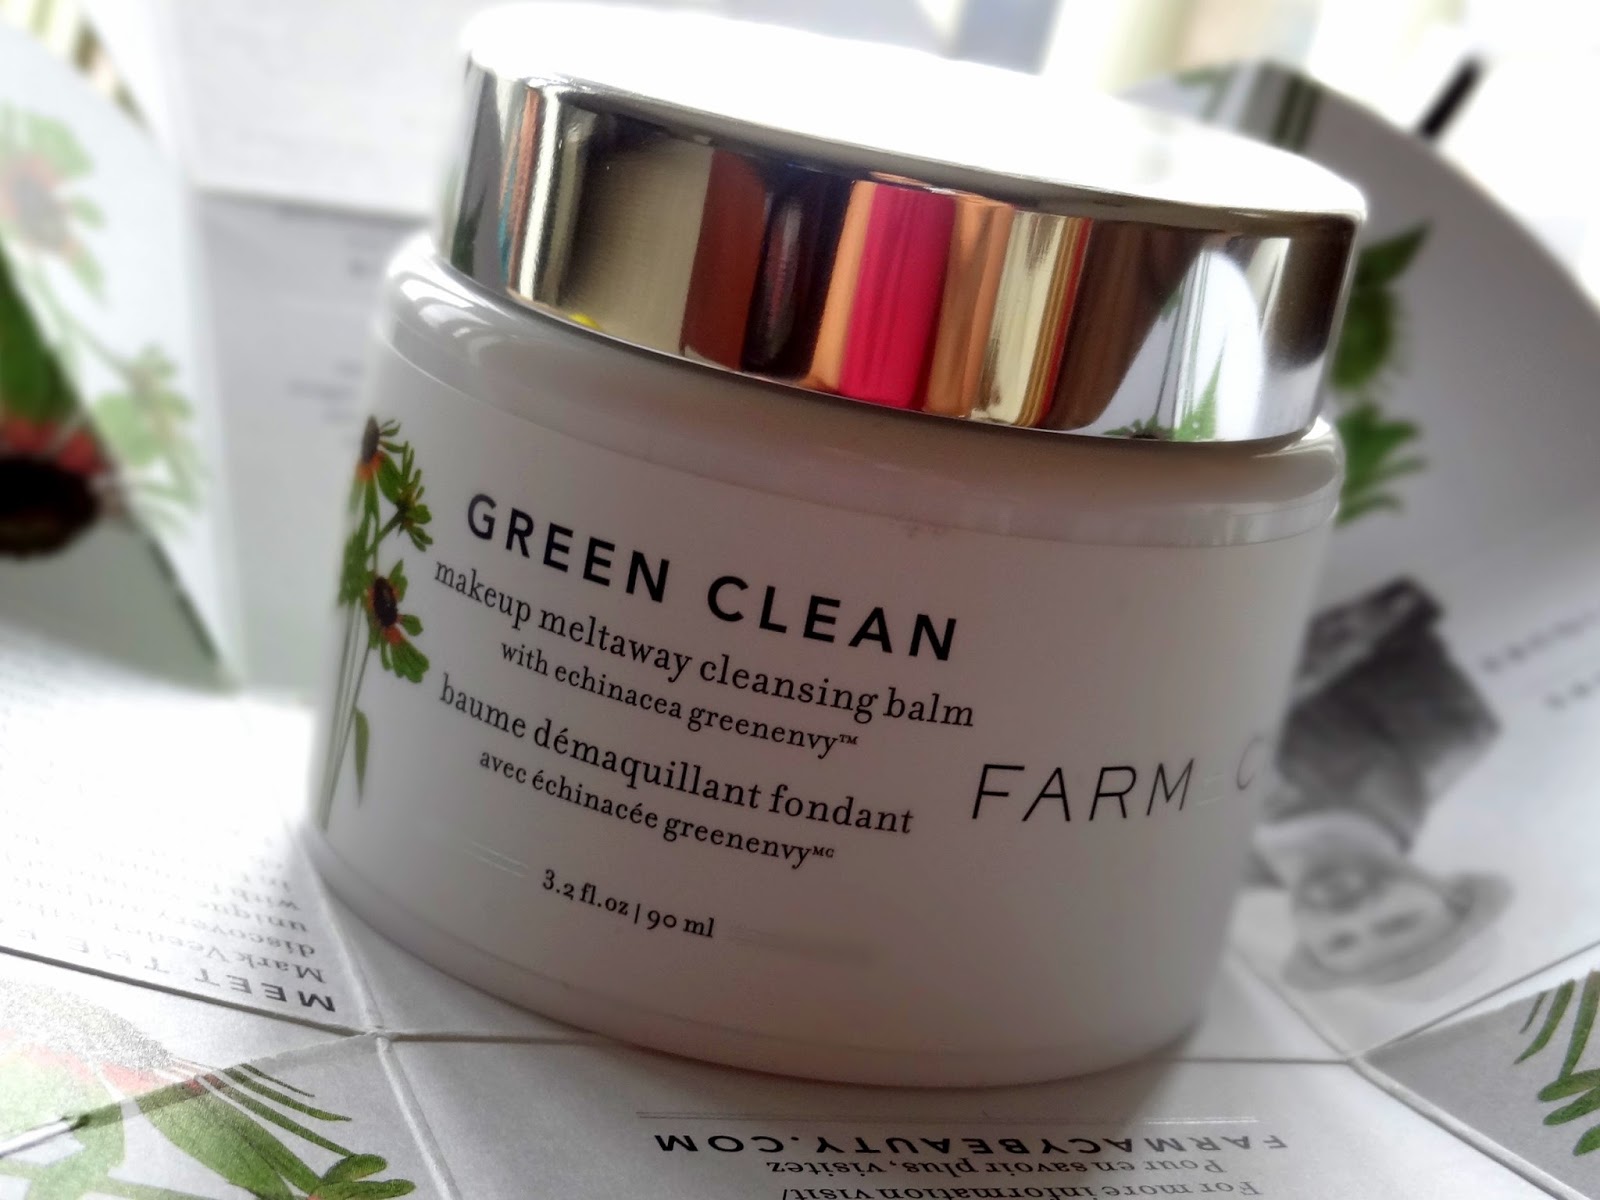 Makeup, Beauty and More: Farmacy Green Clean Makeup Meltaway Cleansing Balm